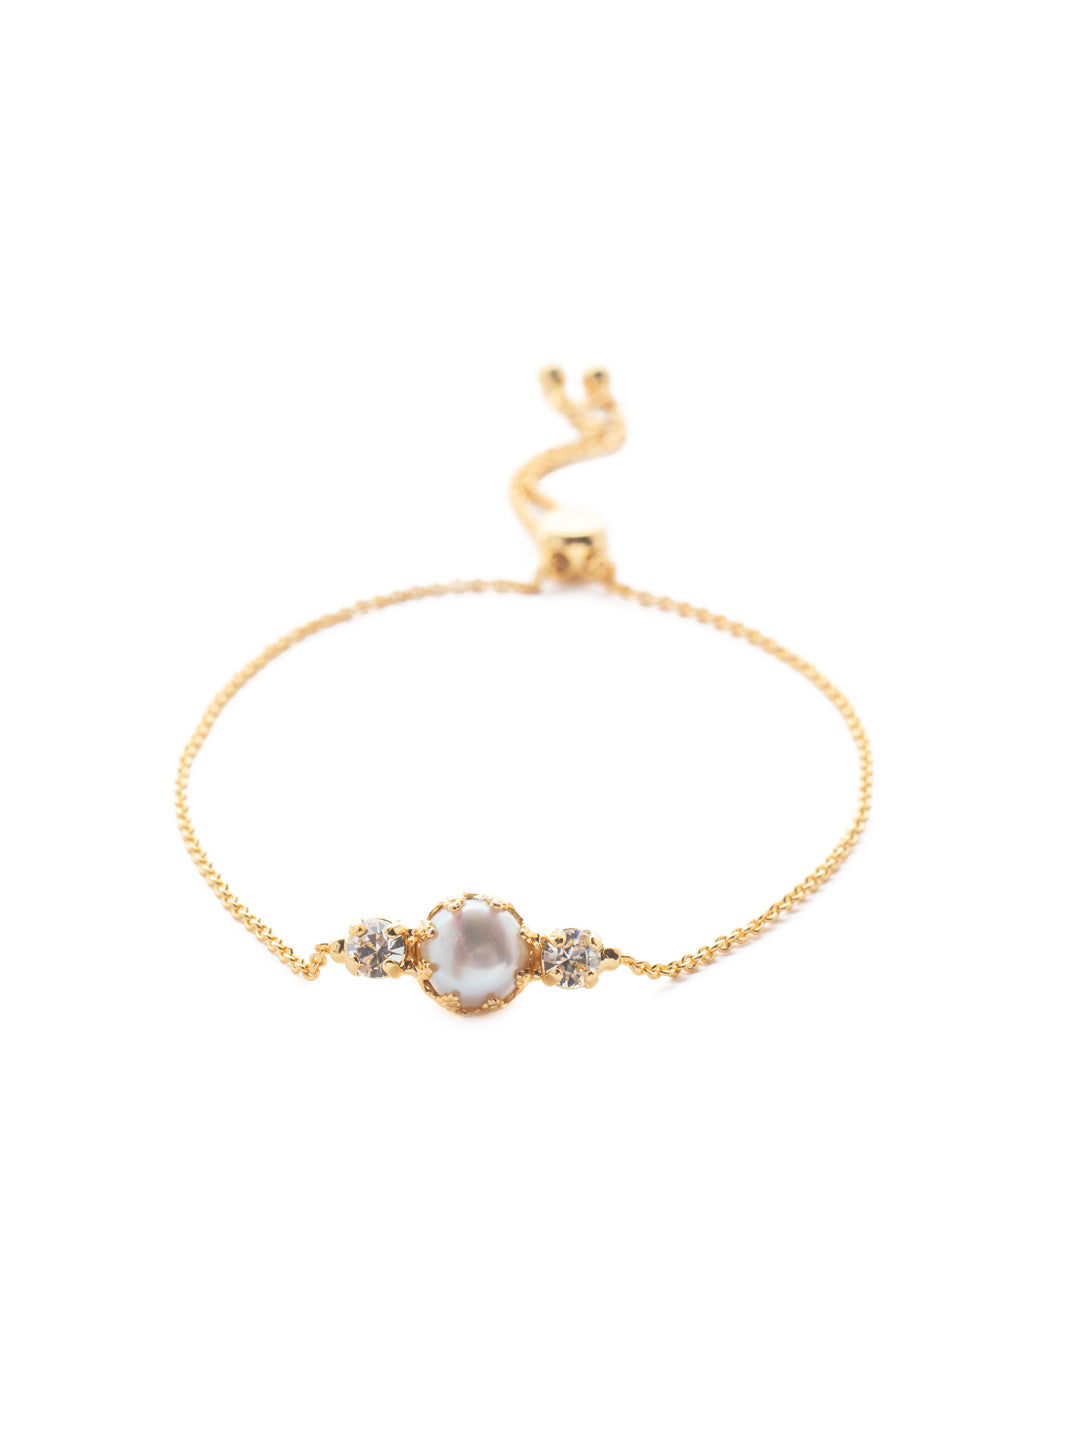 Kit Slider Bracelet - BEV166BGCRY - <p>The Kit Slider Bracelet features a single freshwater pearl nestled between two crystals on an adjustable slider chain. The dainty design makes it perfect for layering! From Sorrelli's Crystal collection in our Bright Gold-tone finish.</p>